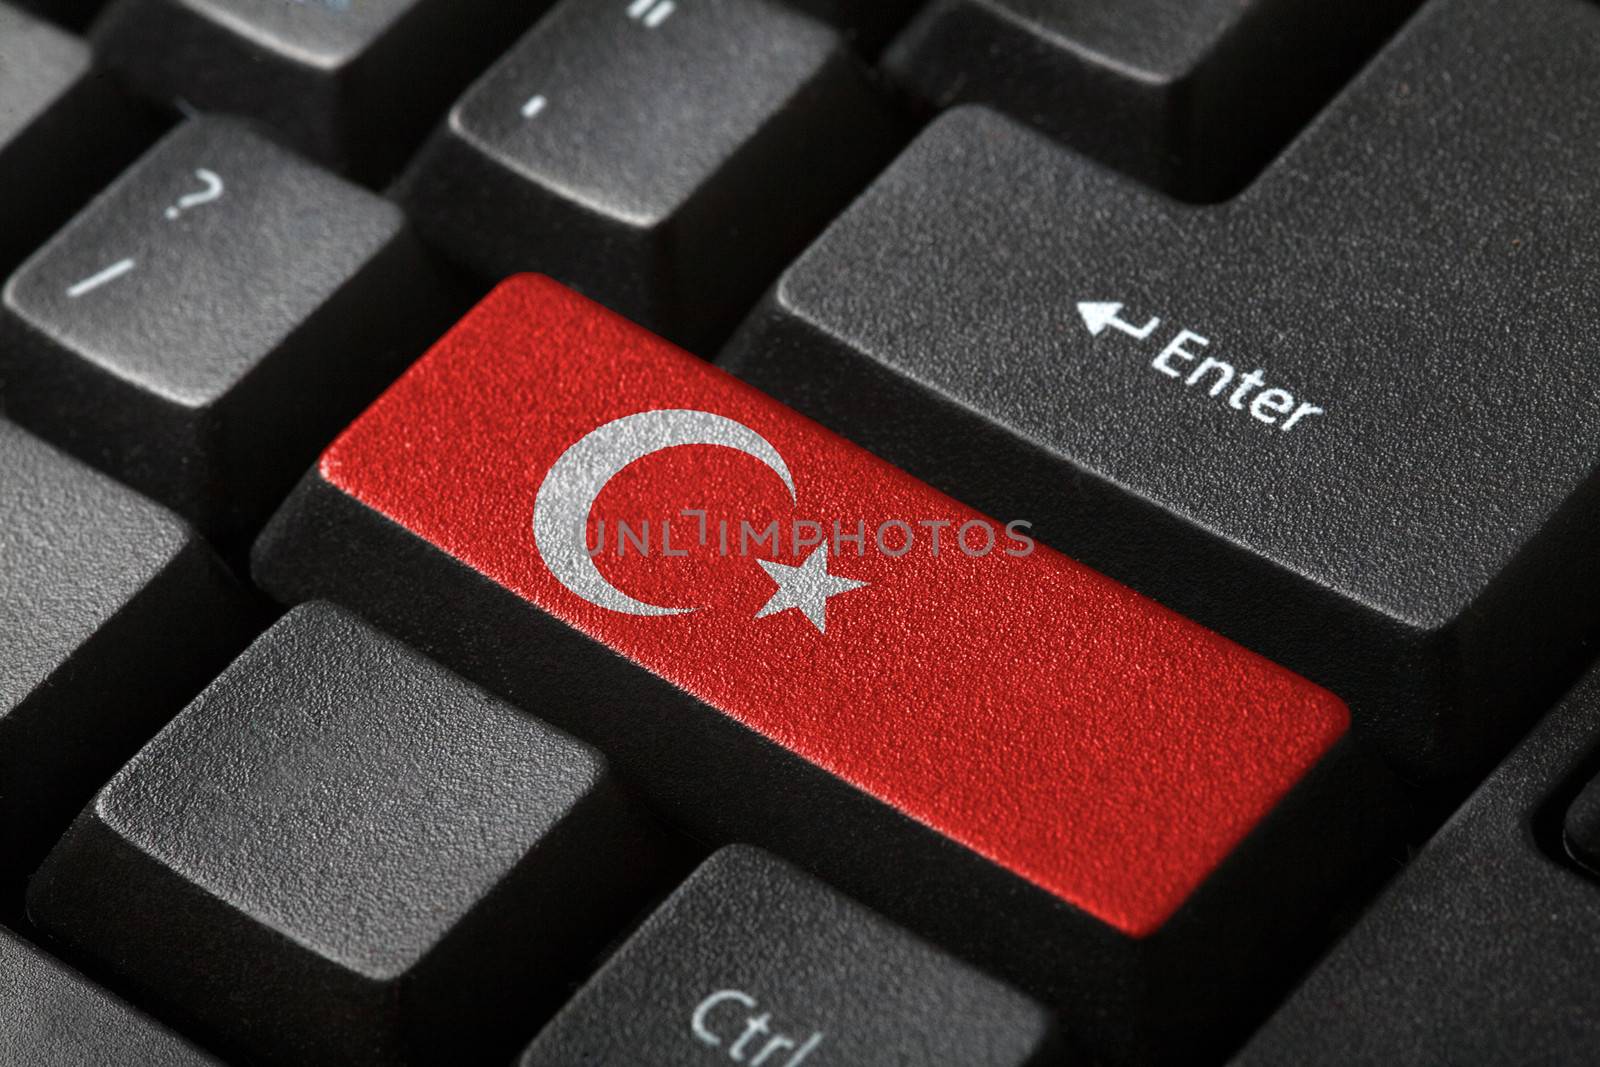 The Turkish flag button on the keyboard. close-up